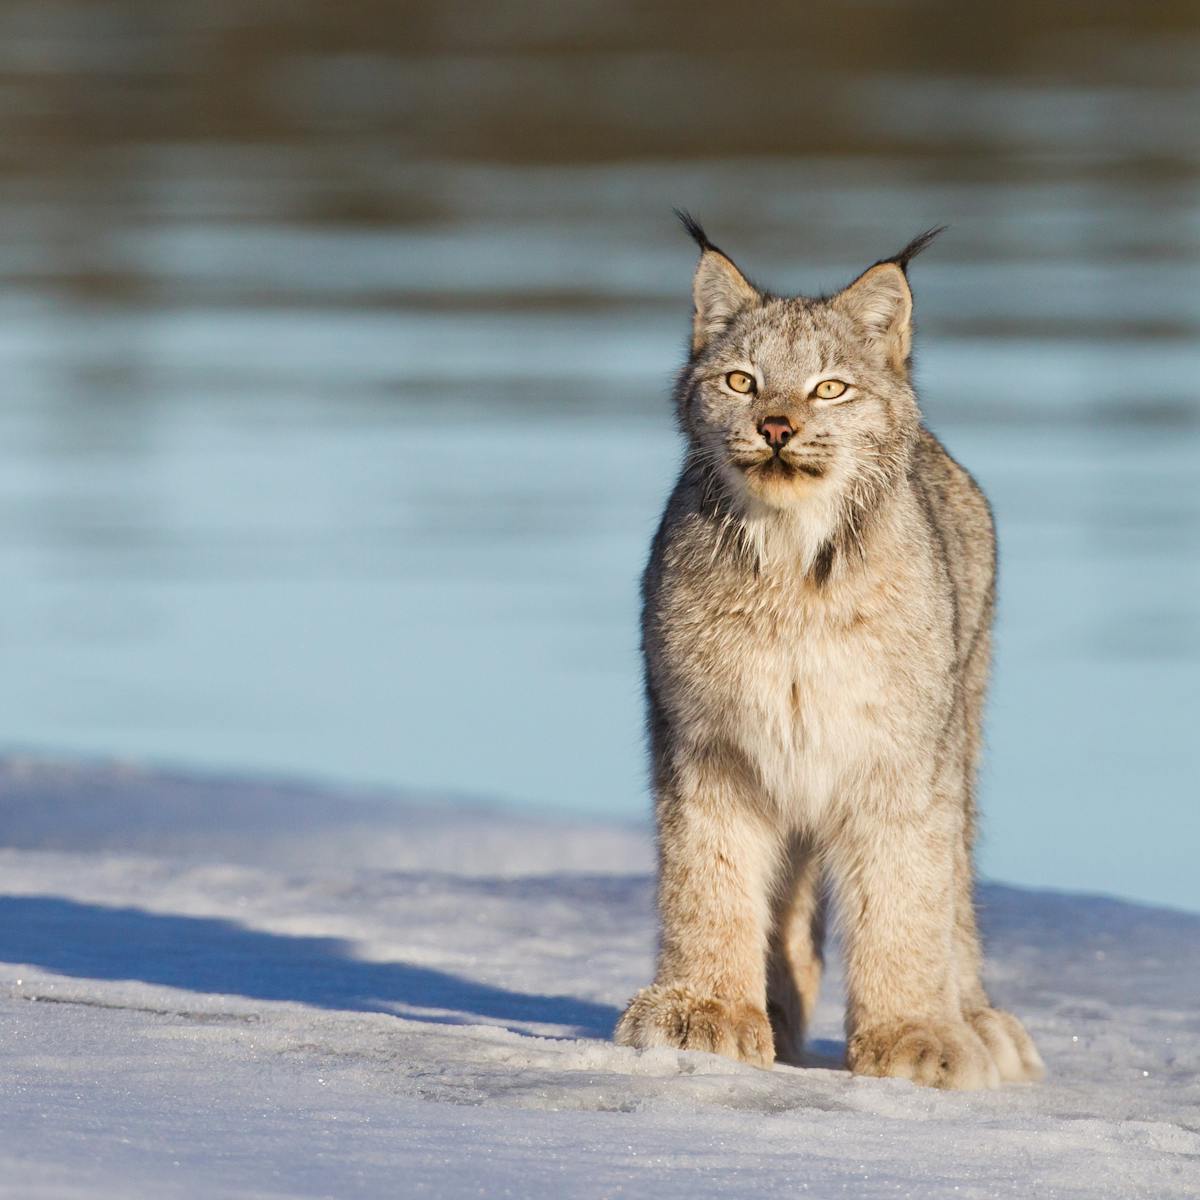 We eavesdropped on some Canadian lynx: What we heard was surprising